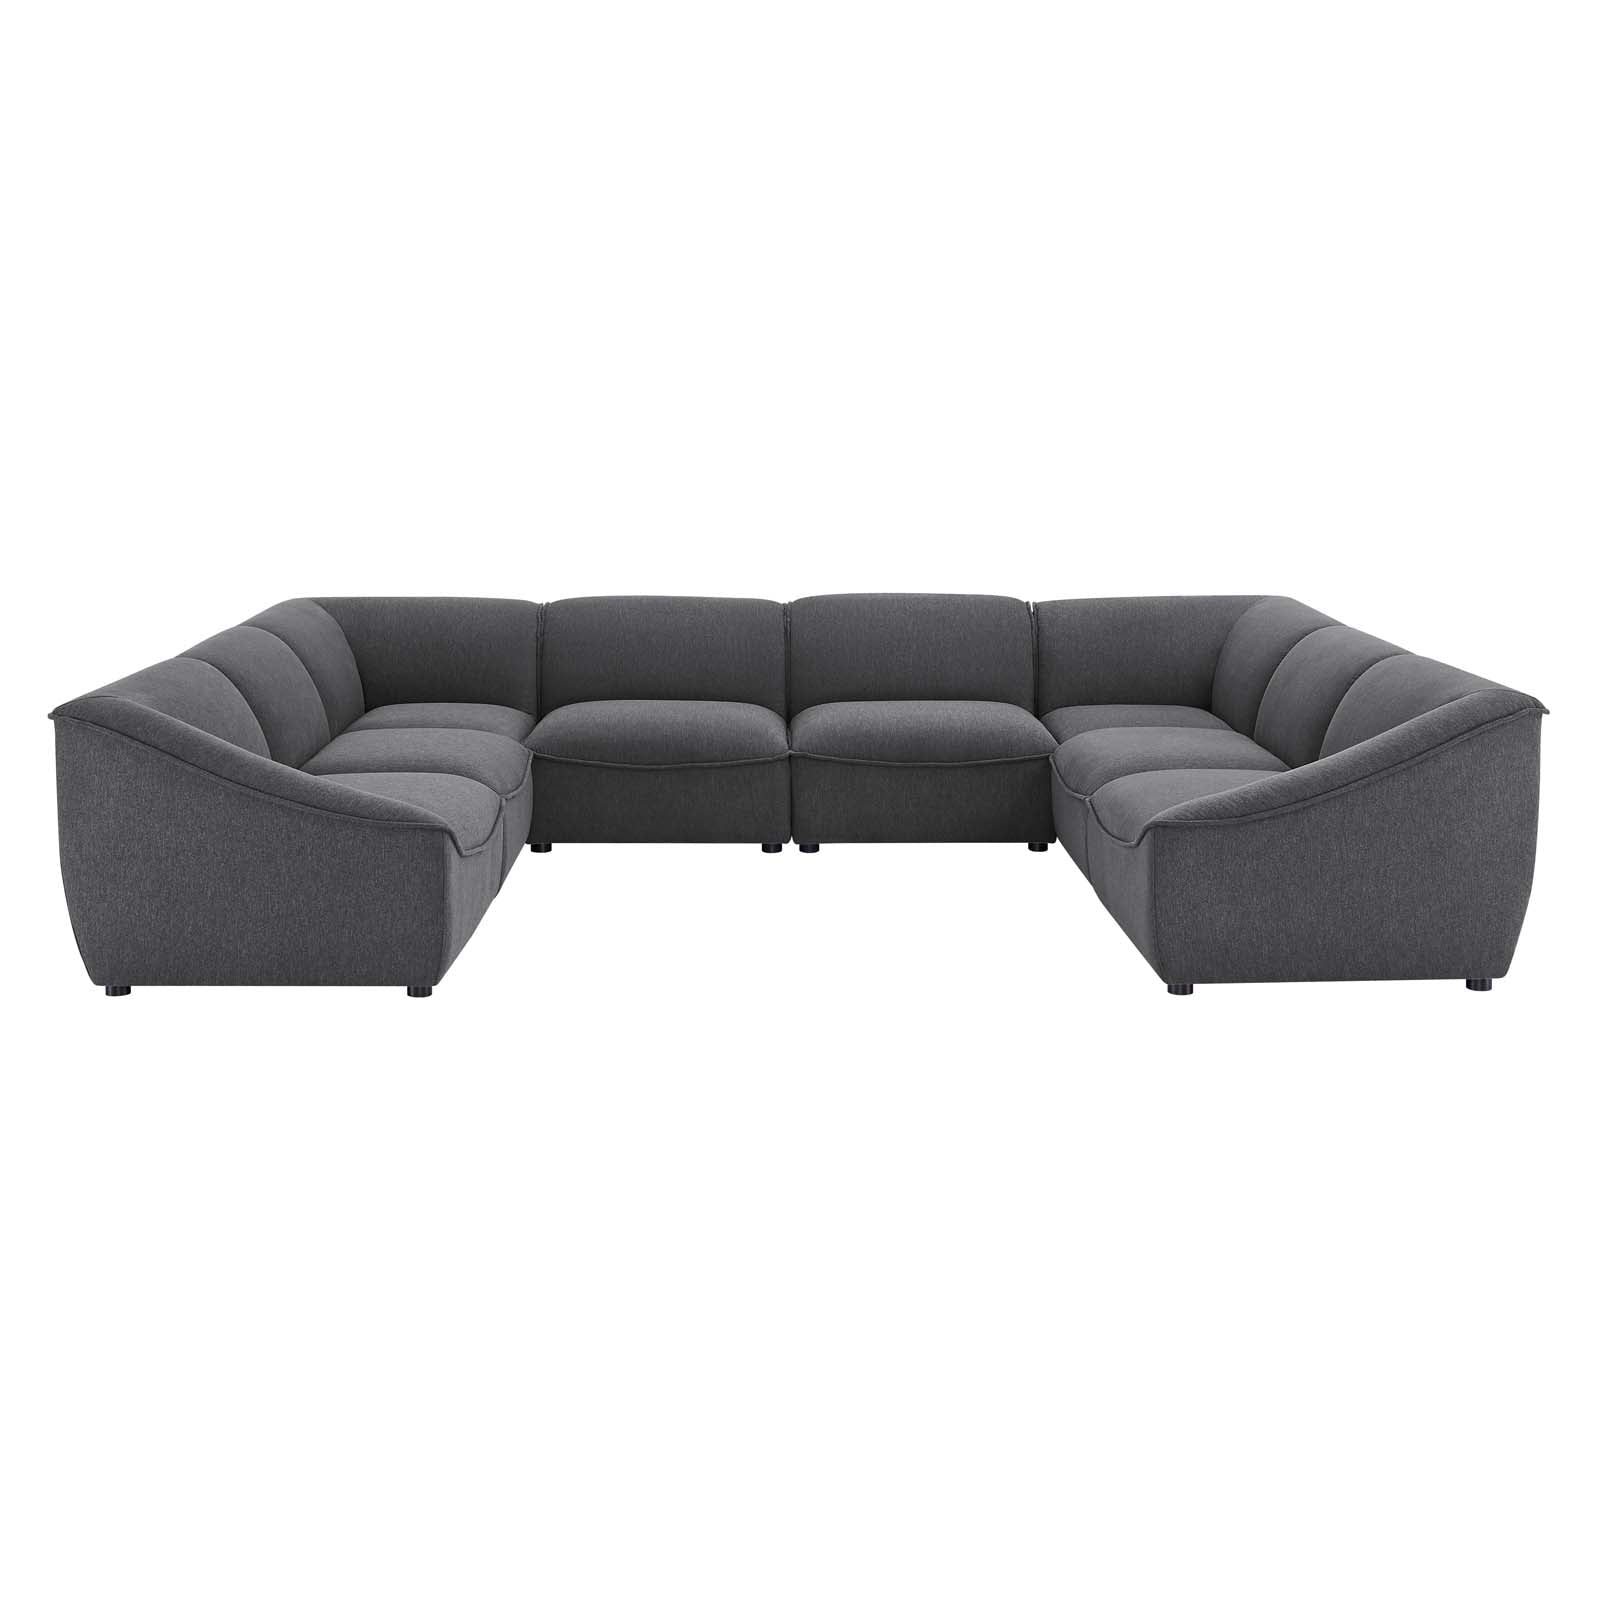 Comprise 8-Piece Sectional Sofa - East Shore Modern Home Furnishings